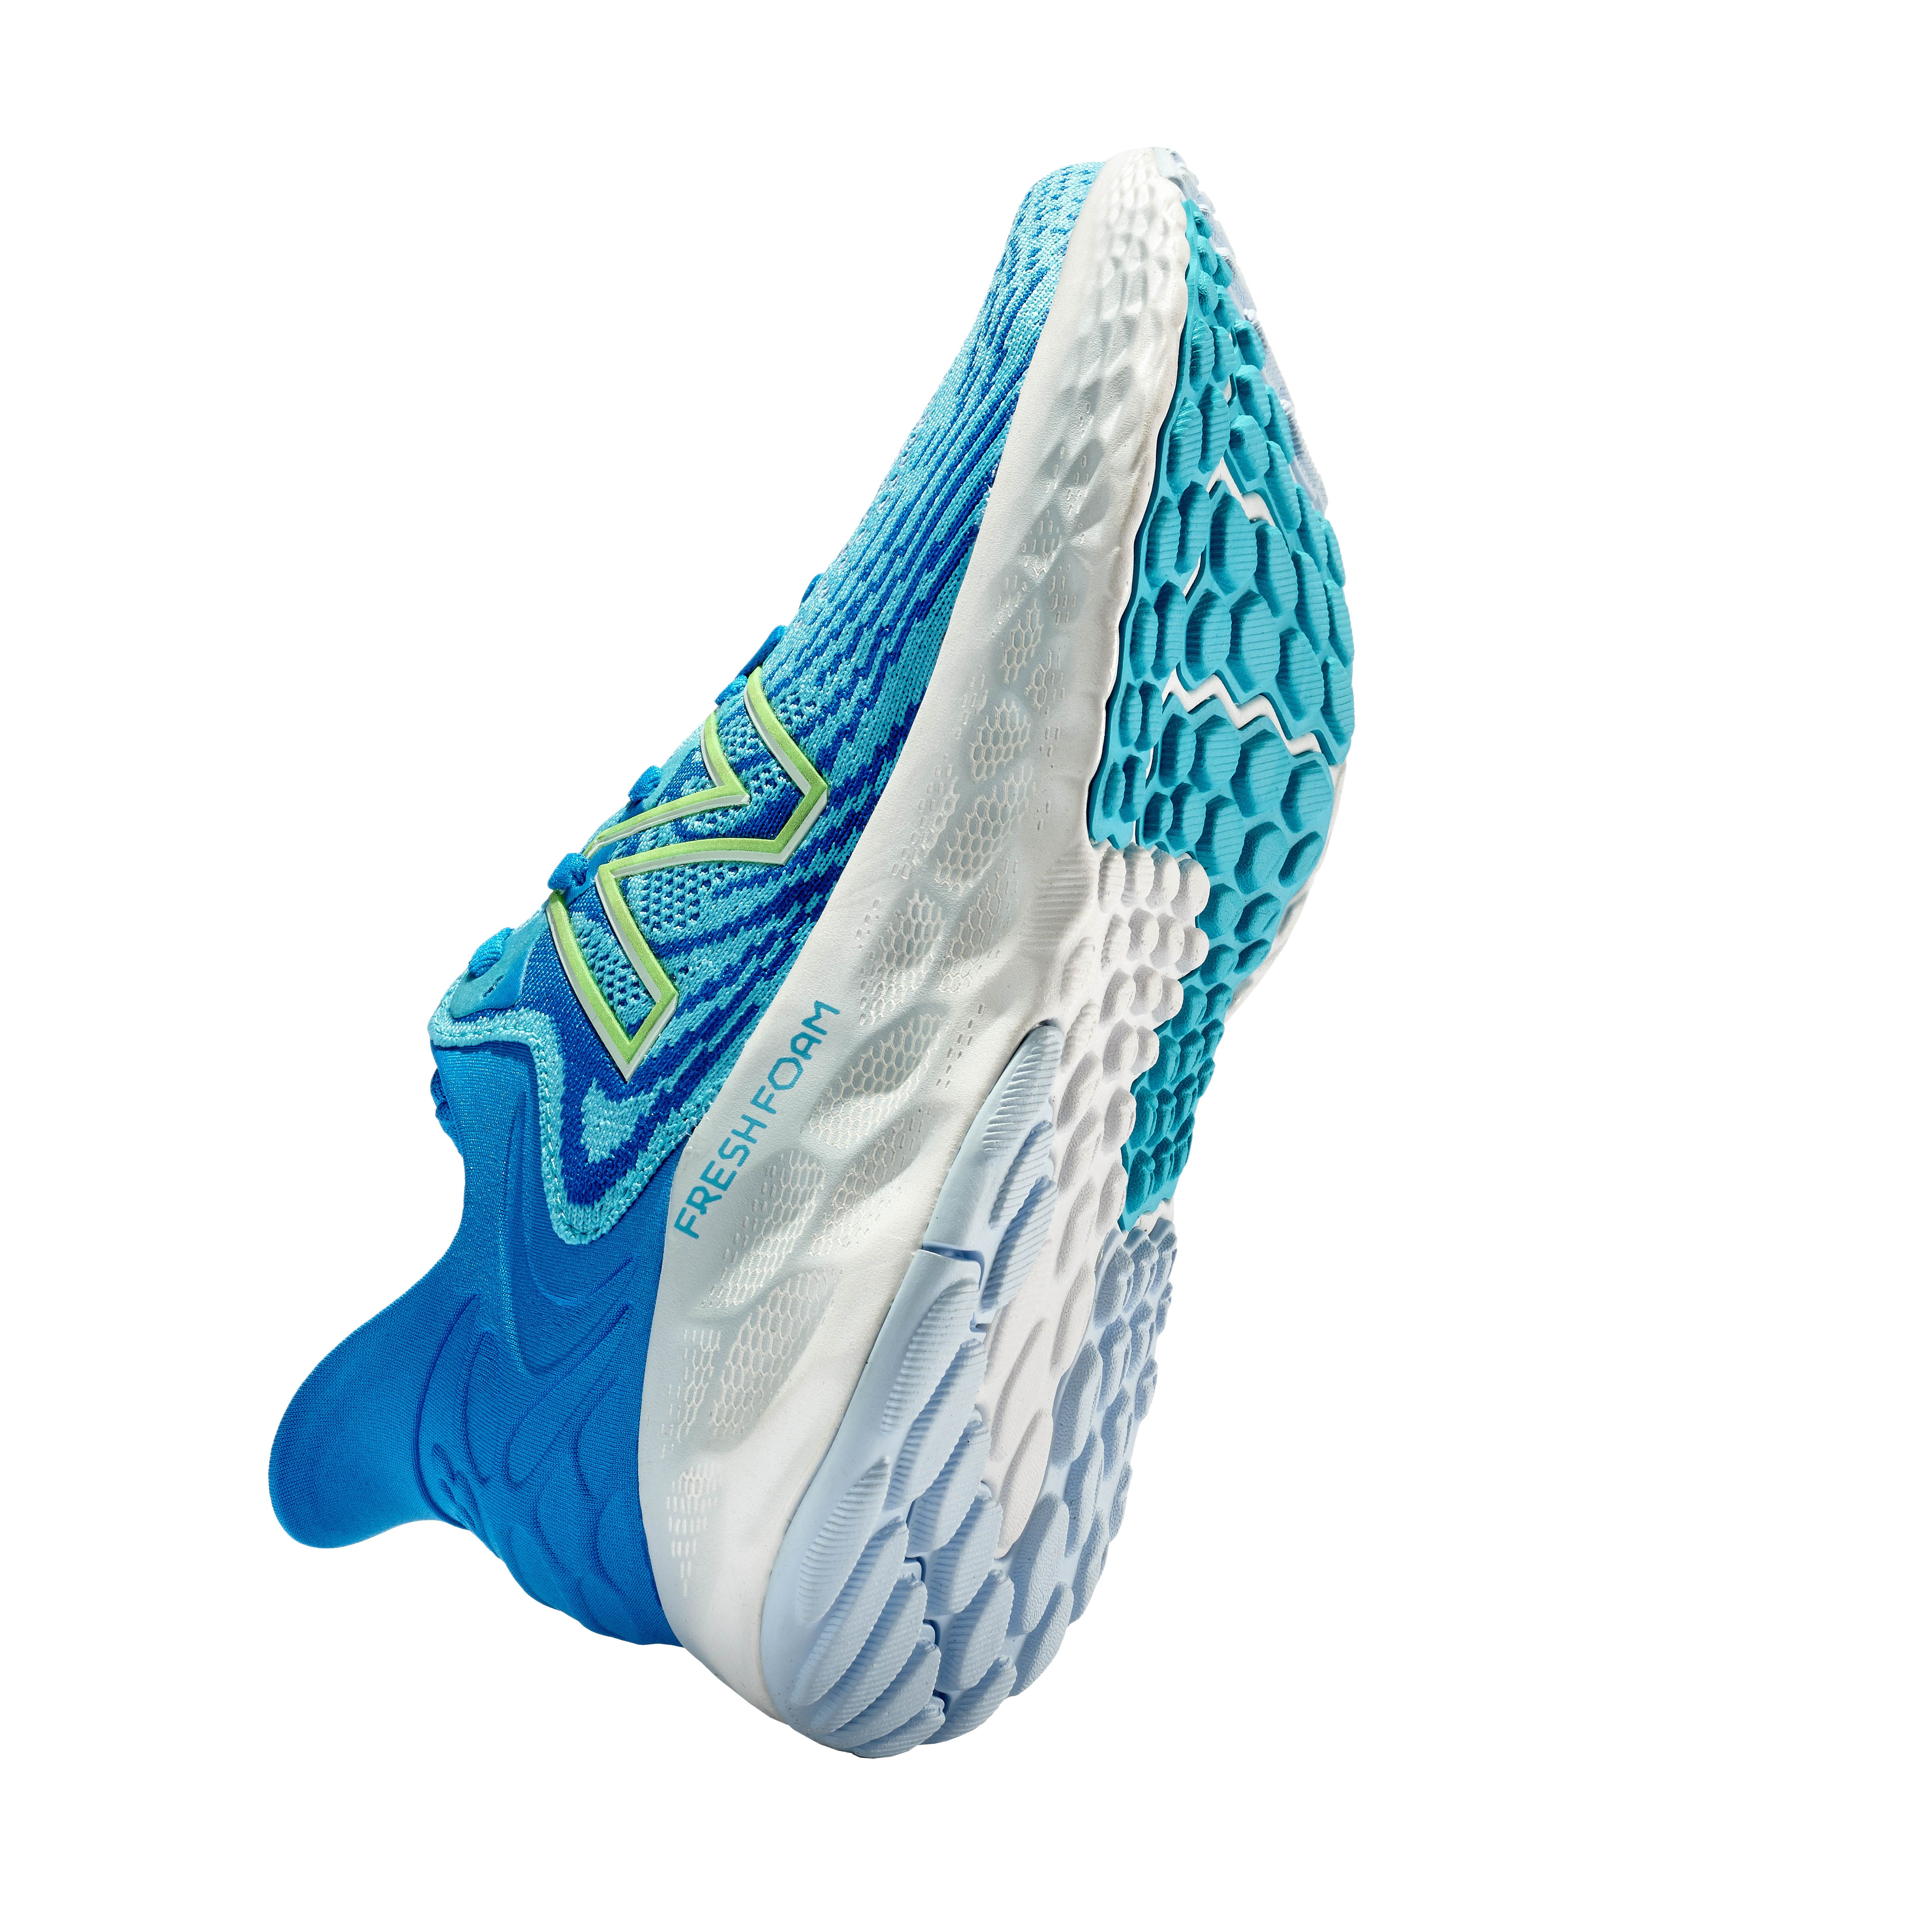 The best running shoes 2022